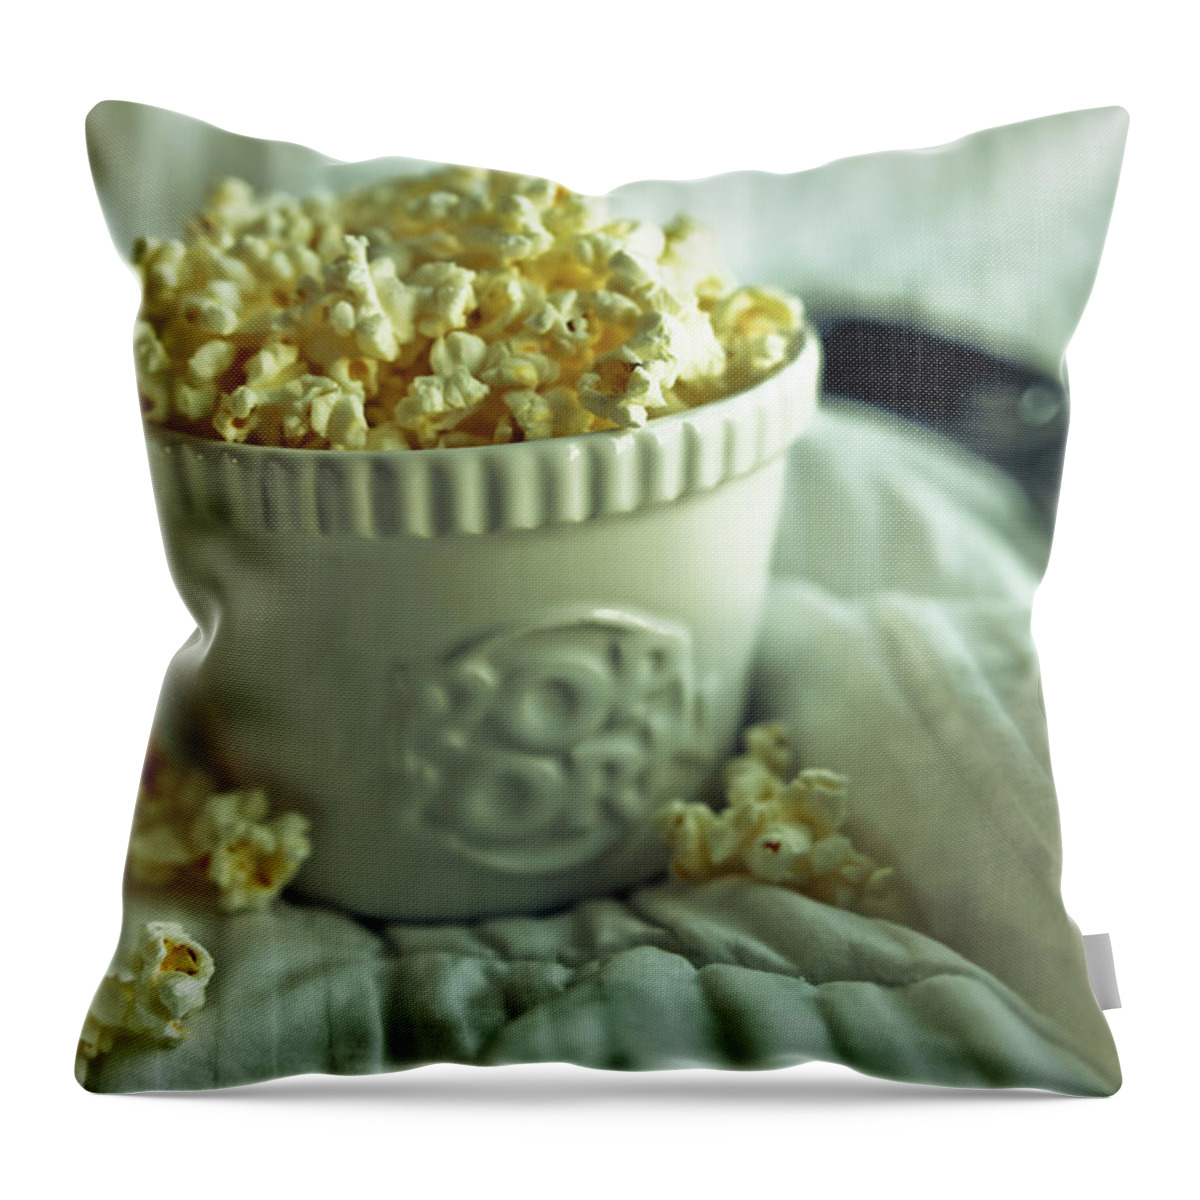 Close-up Throw Pillow featuring the photograph Popcorn In Bed by Steven Brisson Photography